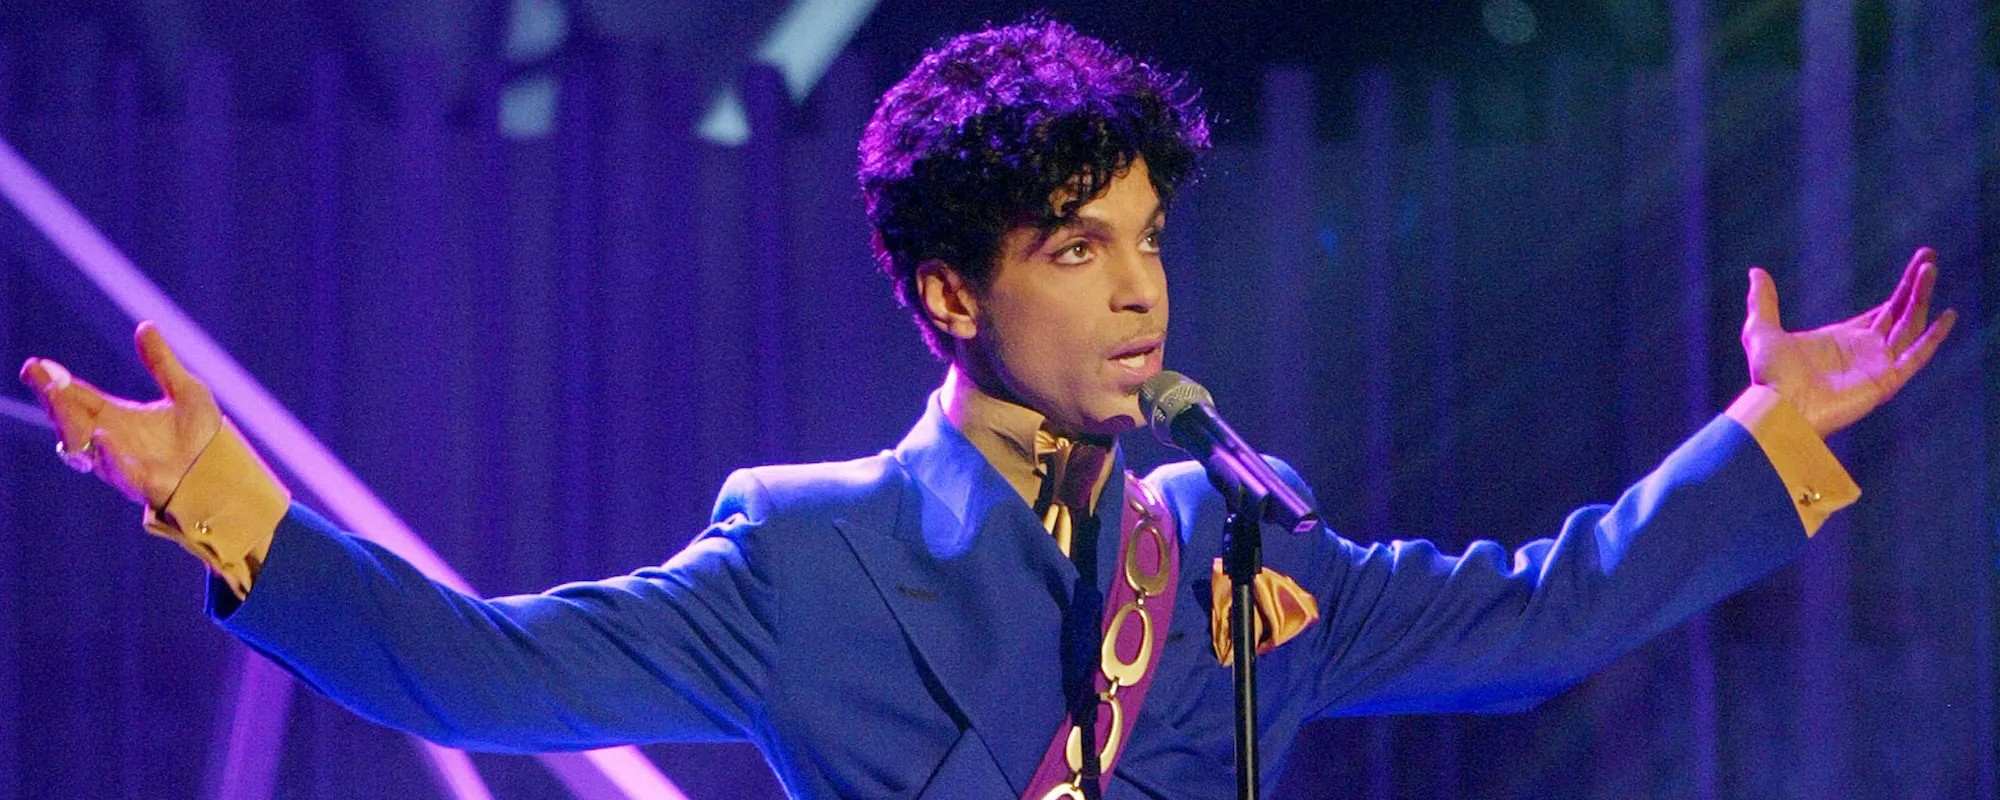 Behind the Deeper Meaning of “When Doves Cry” by Prince